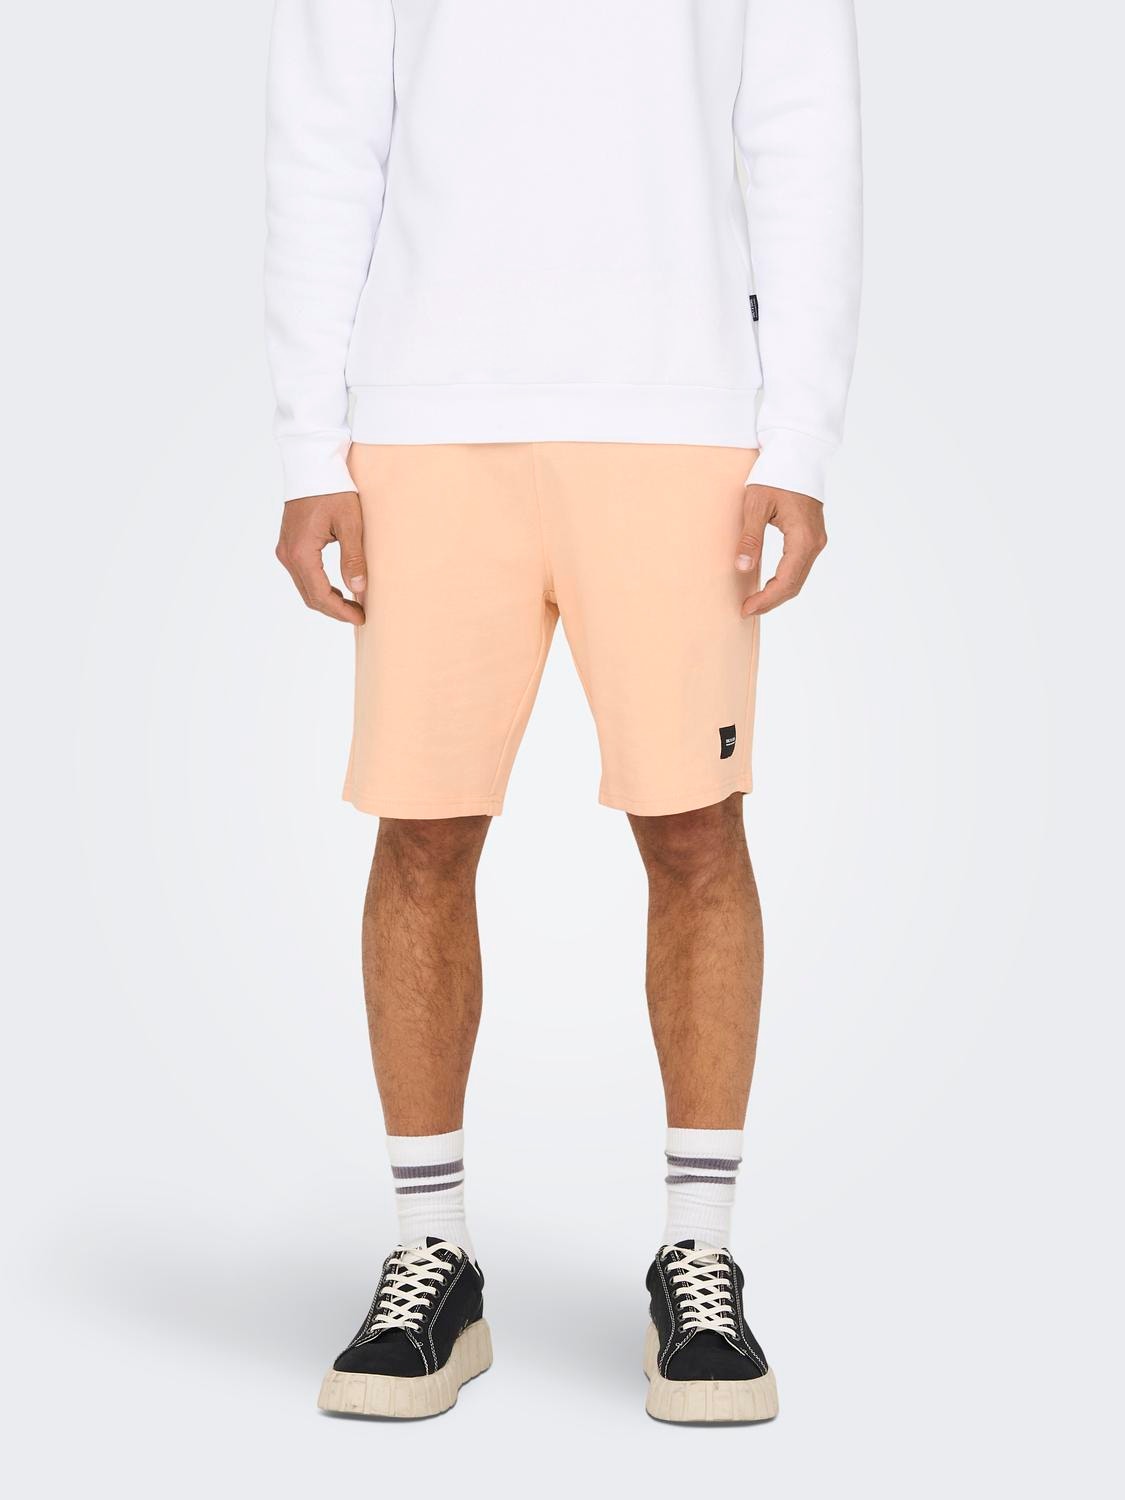 ONLY & SONS Shorts Regular Fit Taille moyenne -Peach Nectar - 22015623